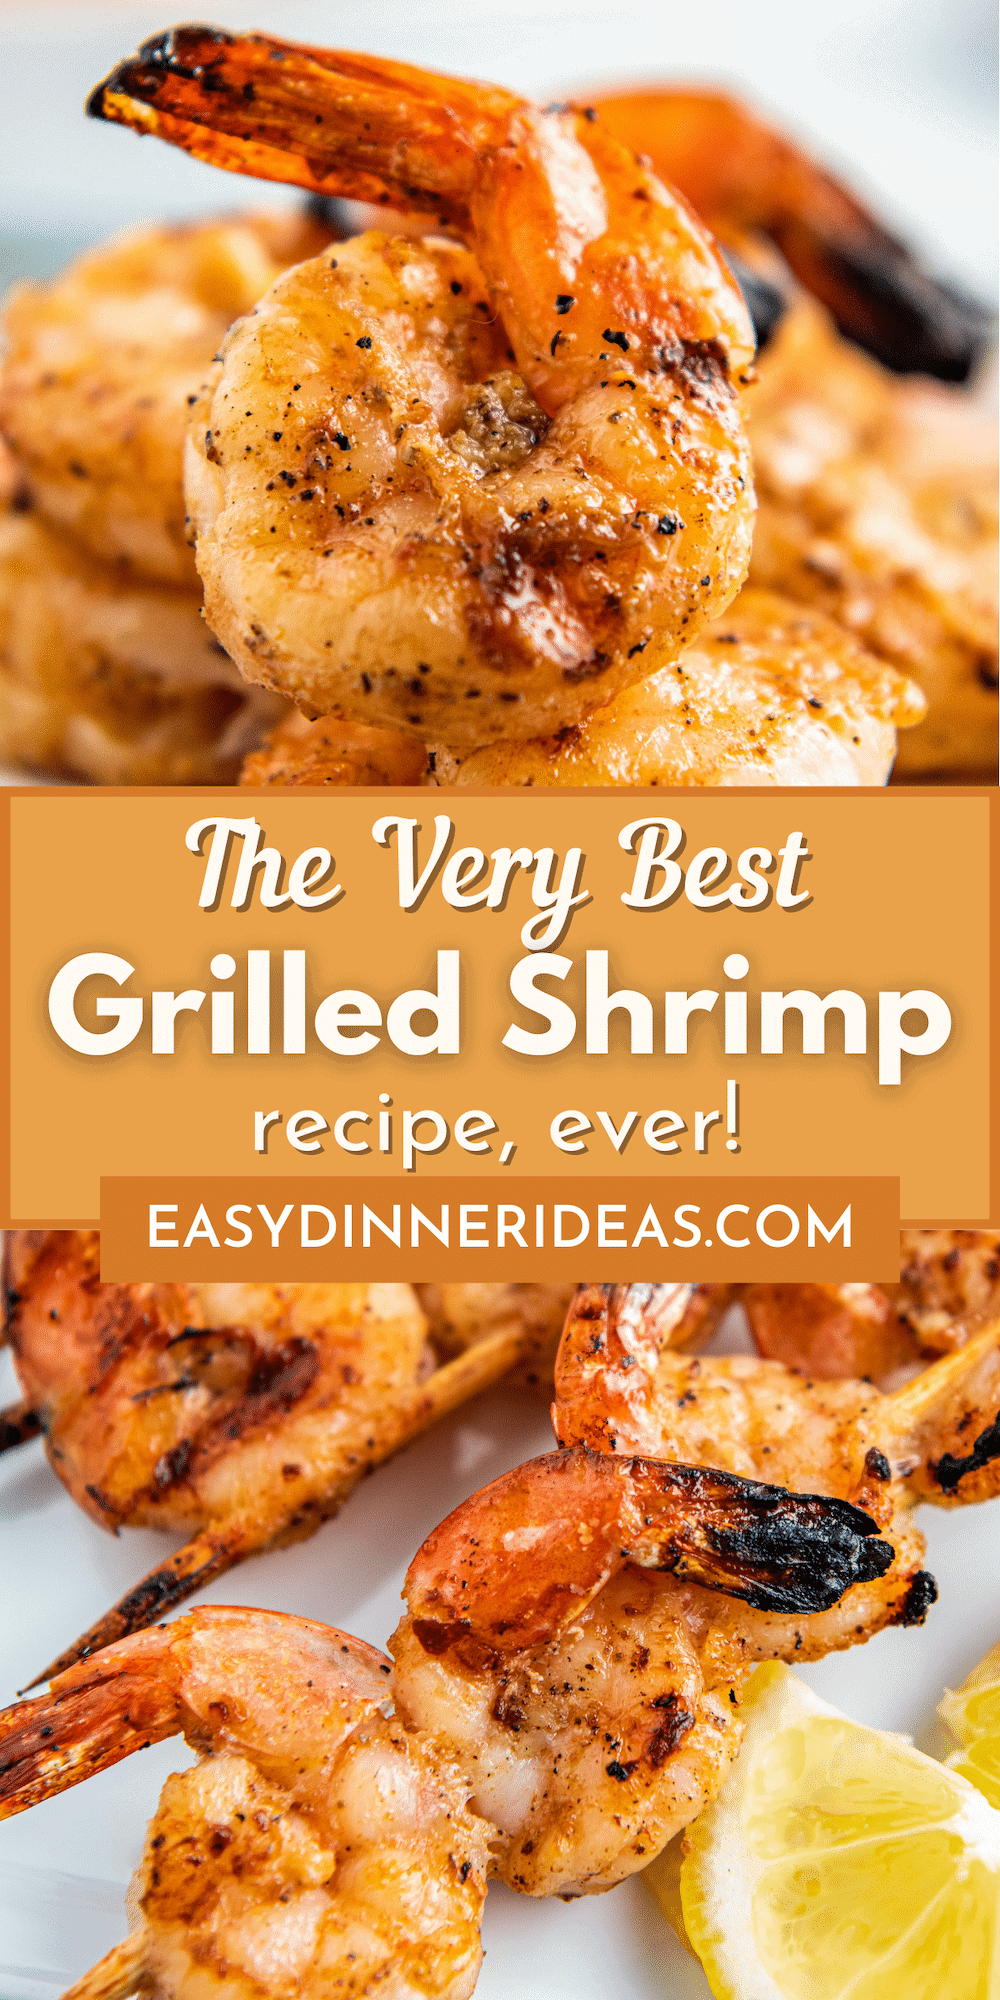 The Best Grilled Shrimp In 15 Minutes | Easy Dinner Ideas